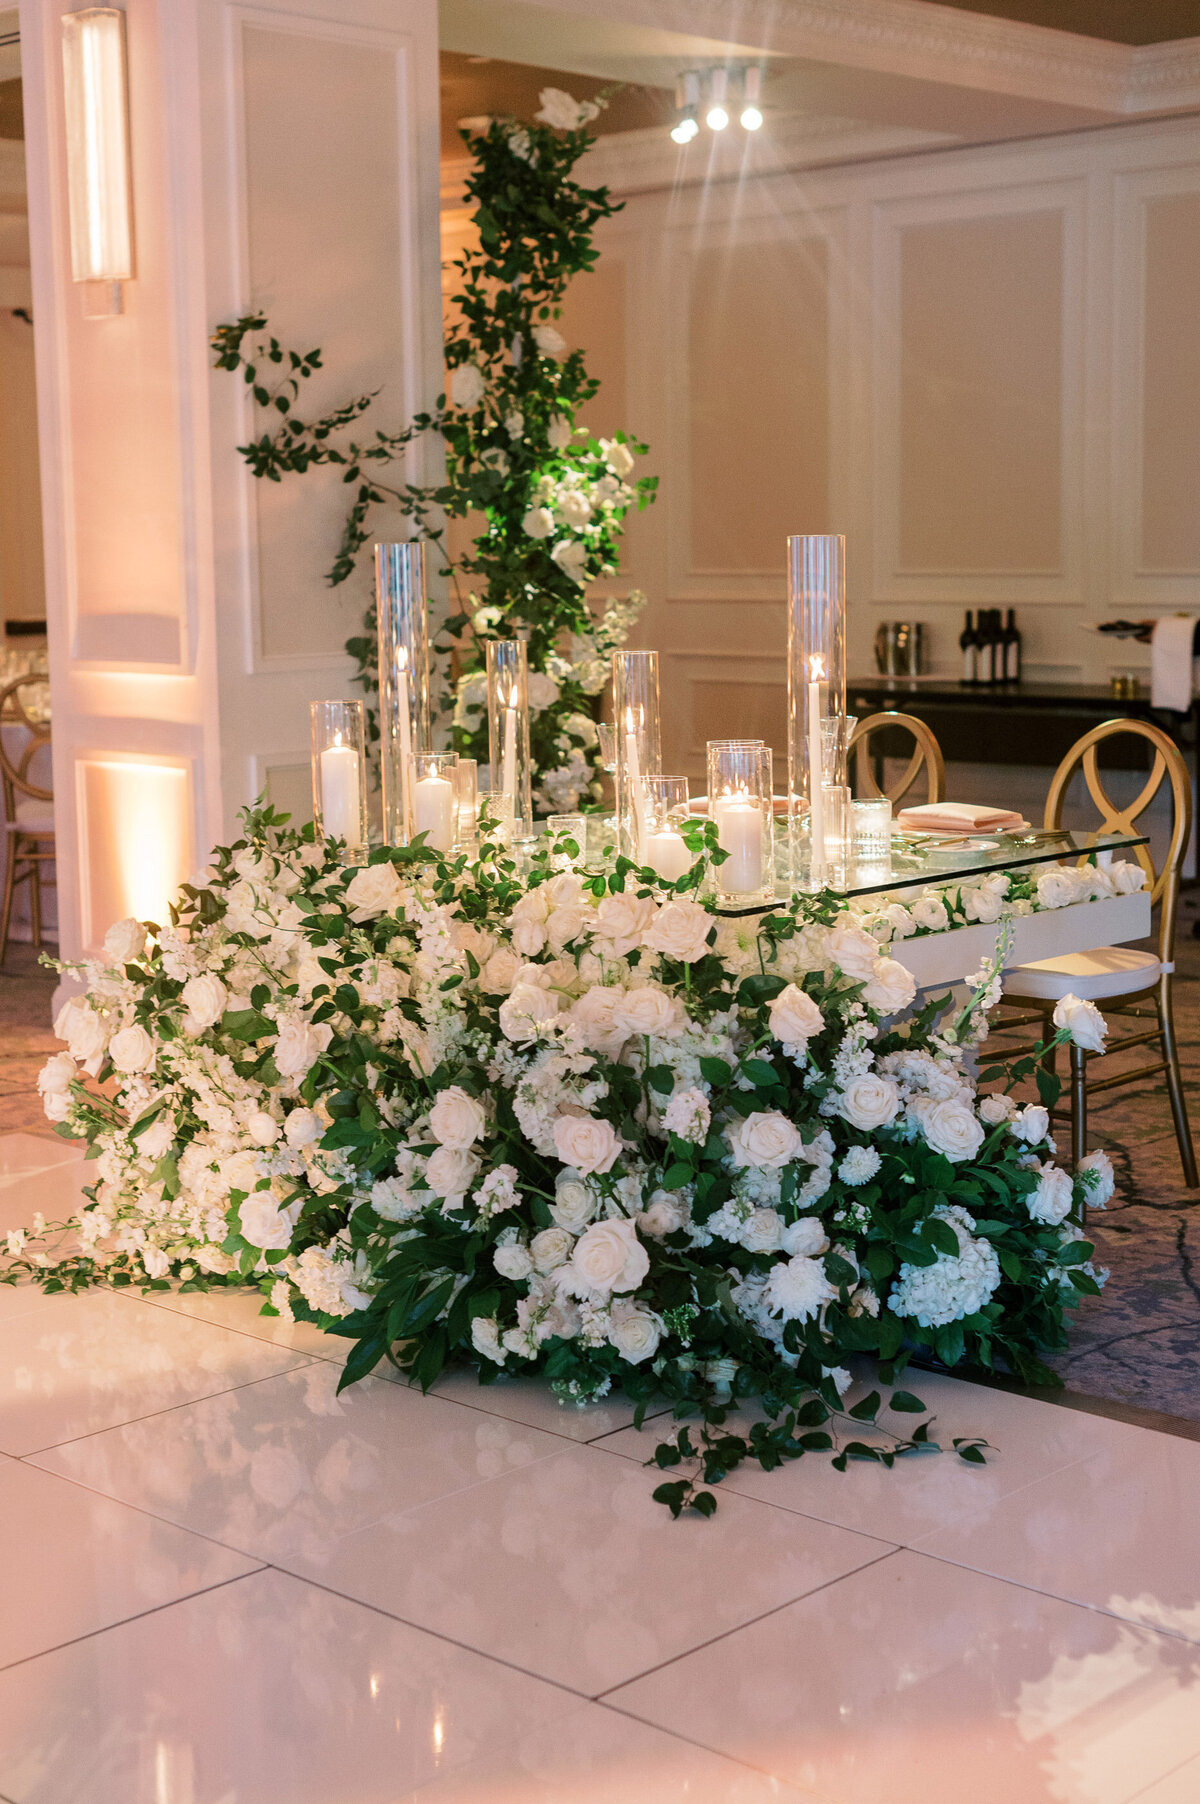 Kate-Murtaugh-Events-Boston-wedding-floral-sweetheart-table